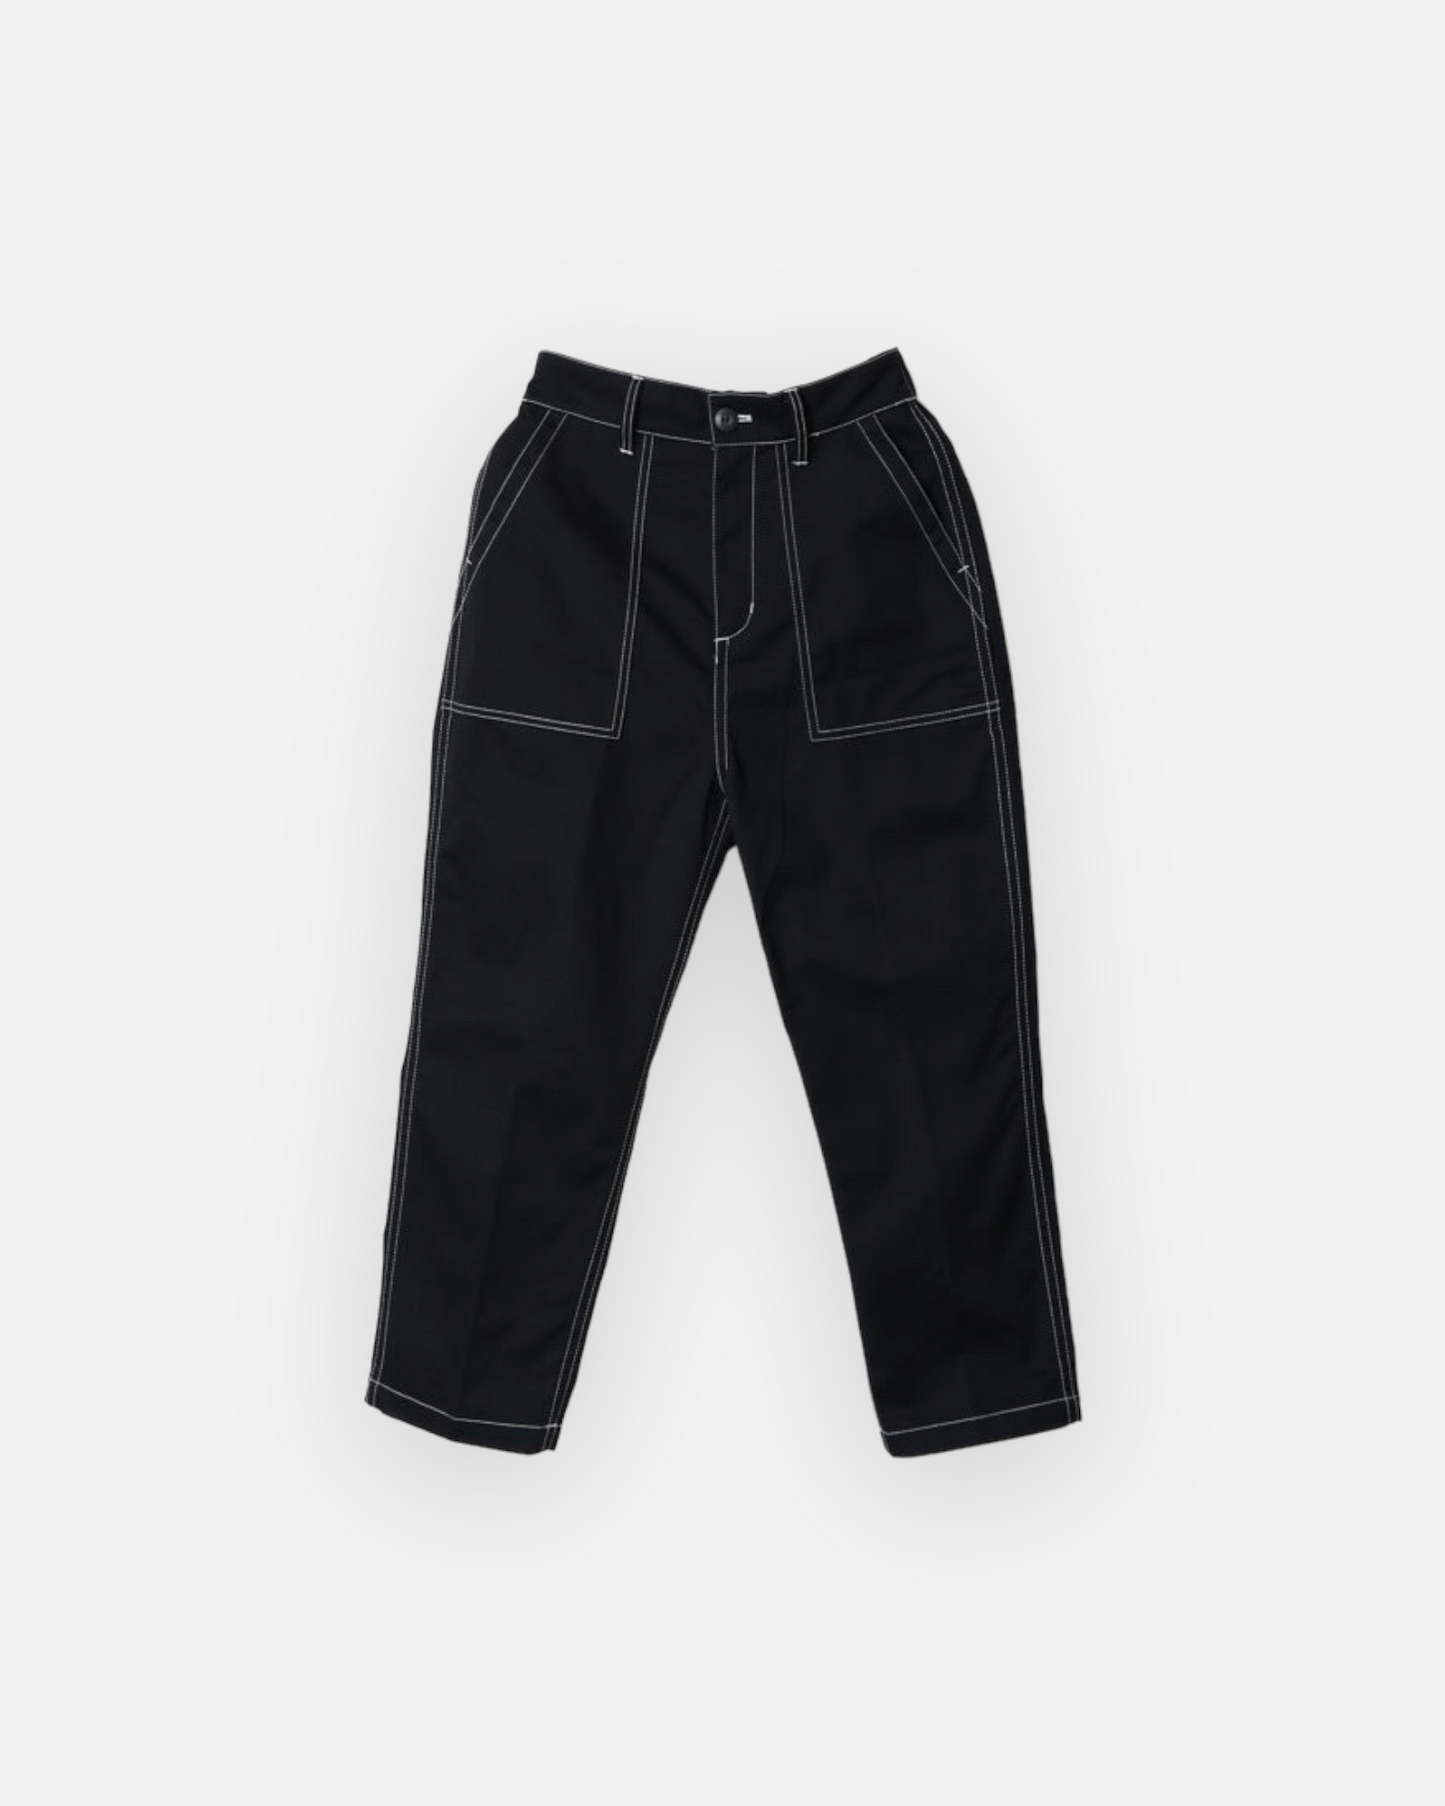 UNIVERSAL OVERALL BAKER PANTS 16X12 T/C TWILL (NAVY)